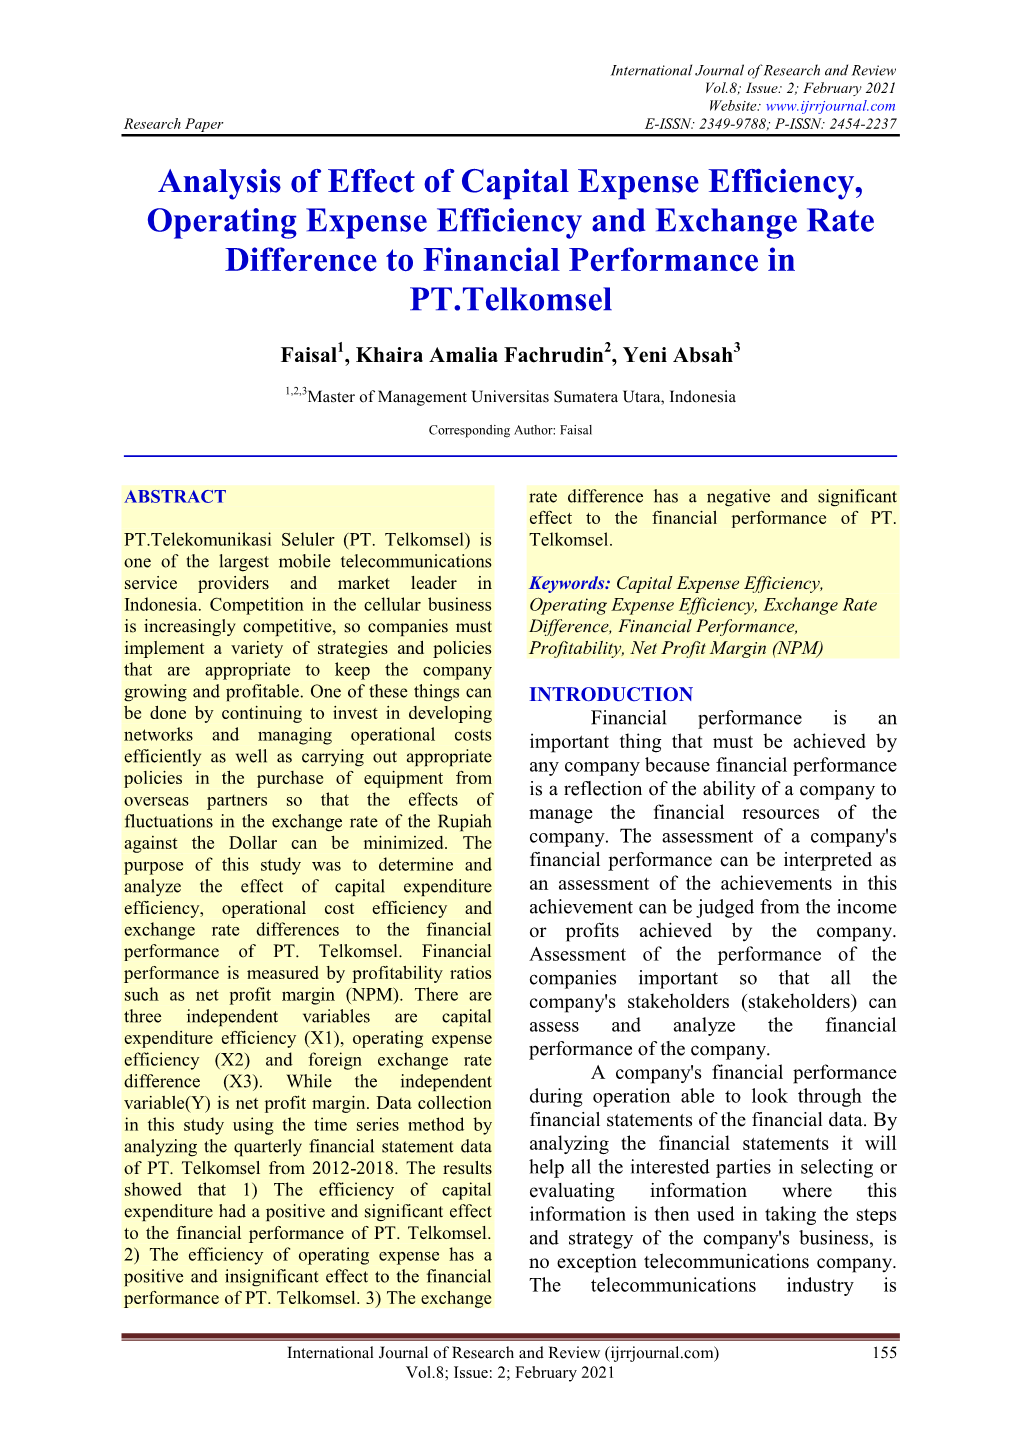 Analysis of Effect of Capital Expense Efficiency, Operating Expense Efficiency and Exchange Rate Difference to Financial Performance in PT.Telkomsel